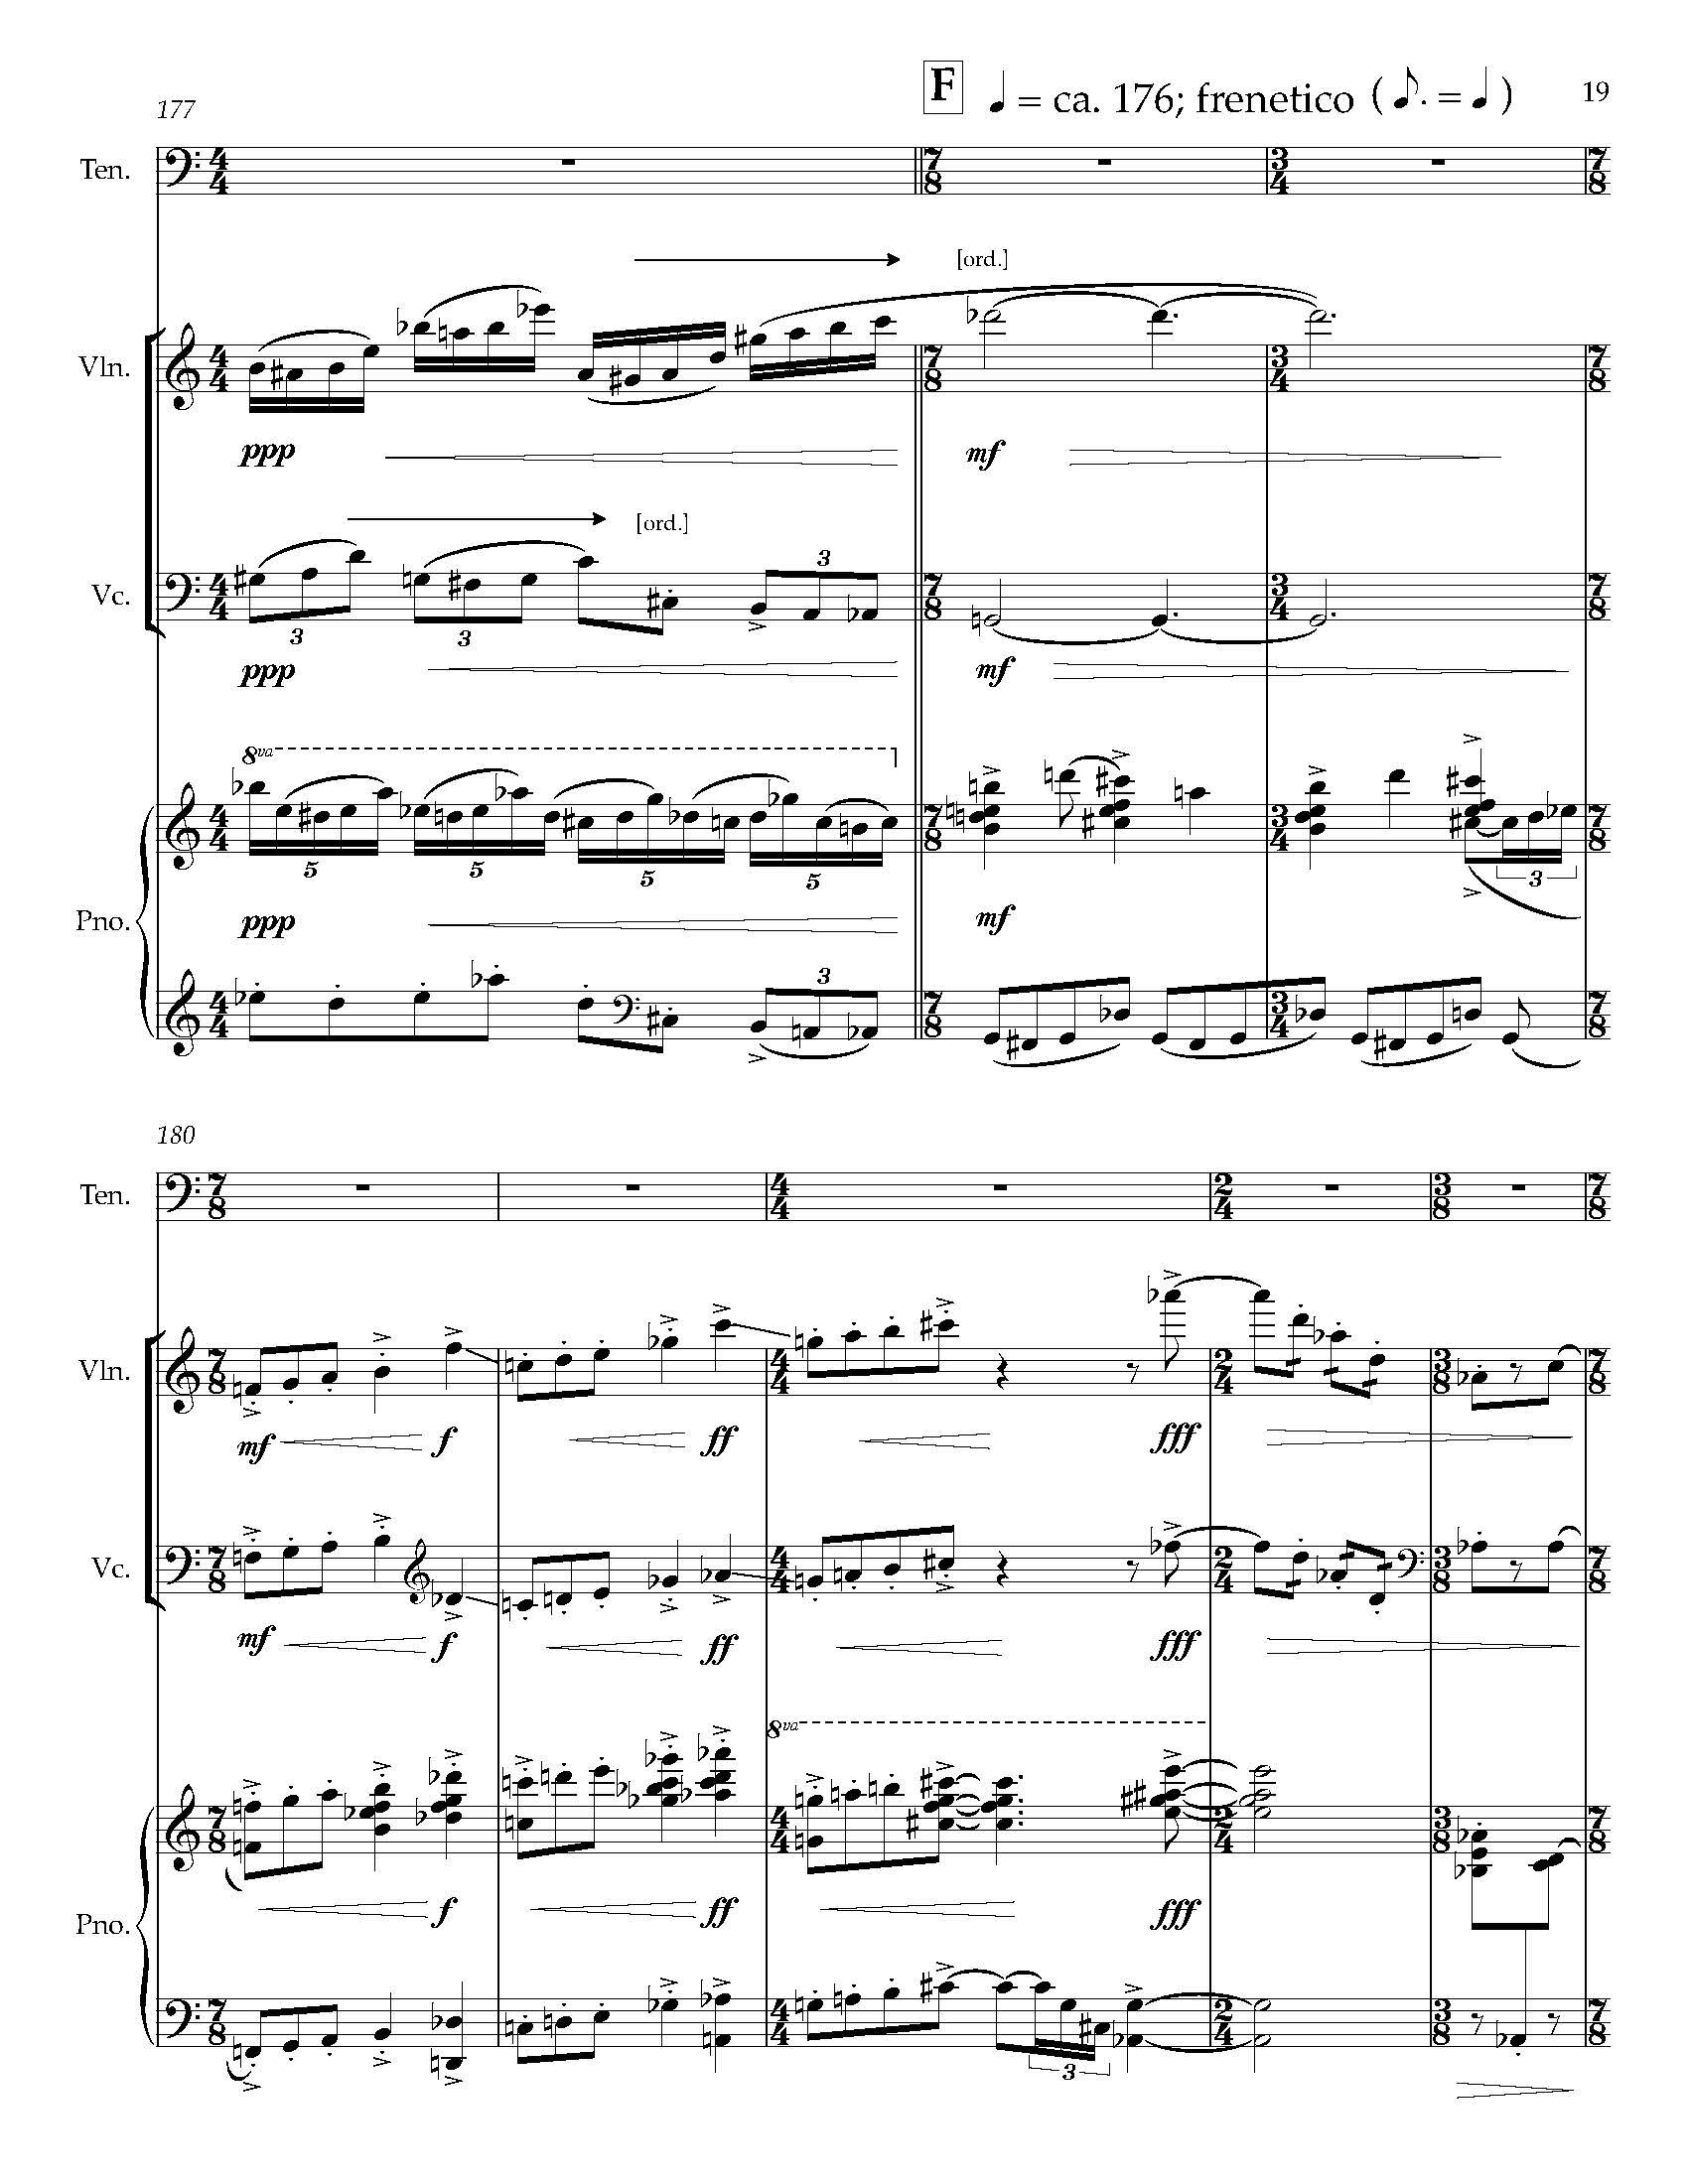 Gursky Songs - Complete Score_Page_27.jpg